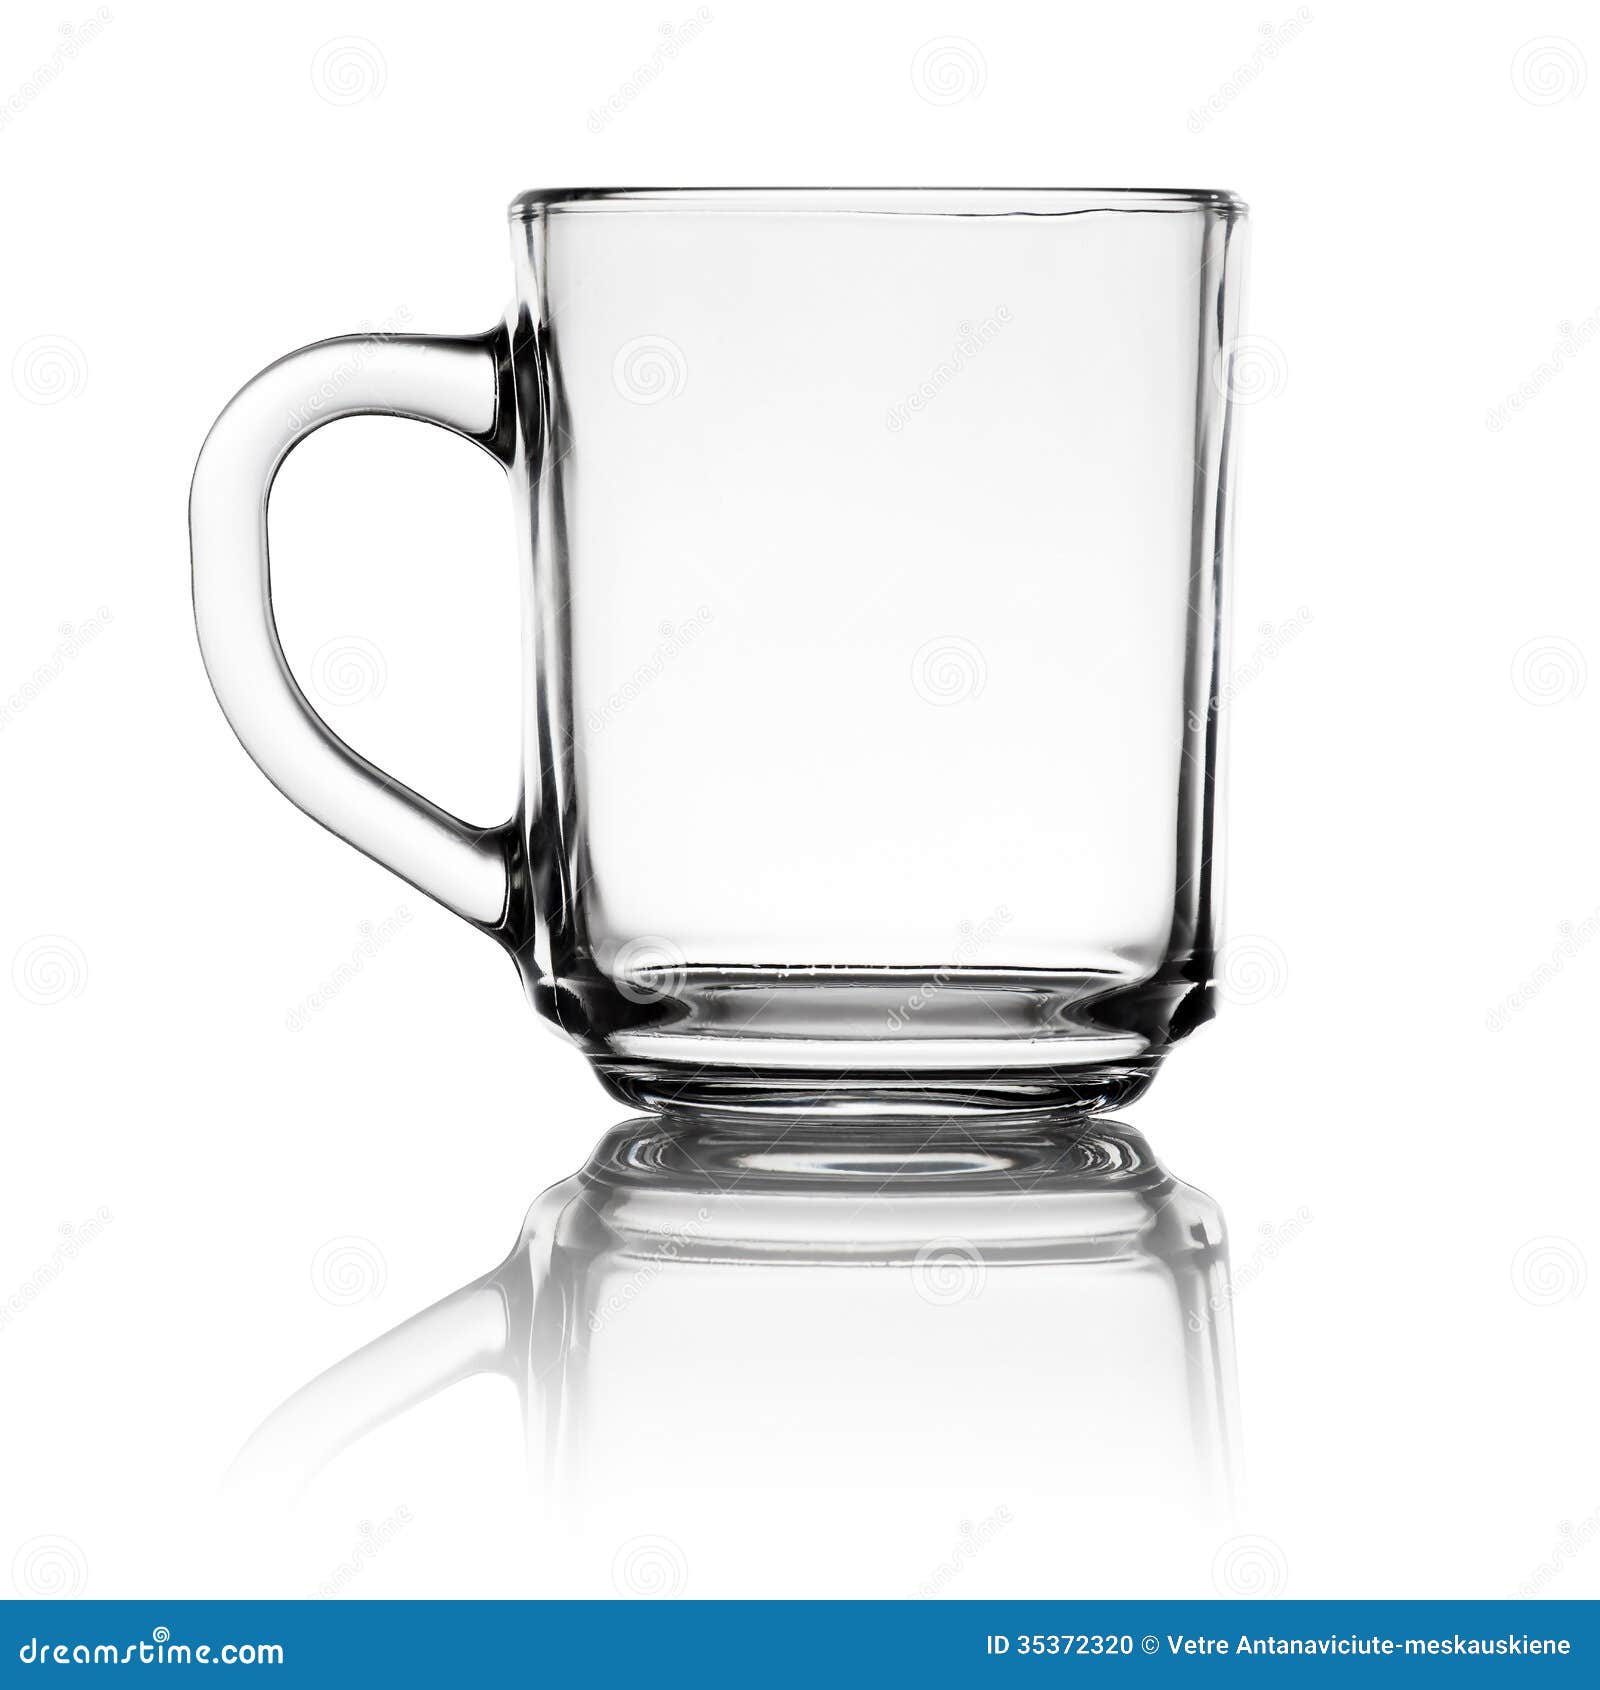 Glass Cup Stock Photos and Pictures - 308,433 Images